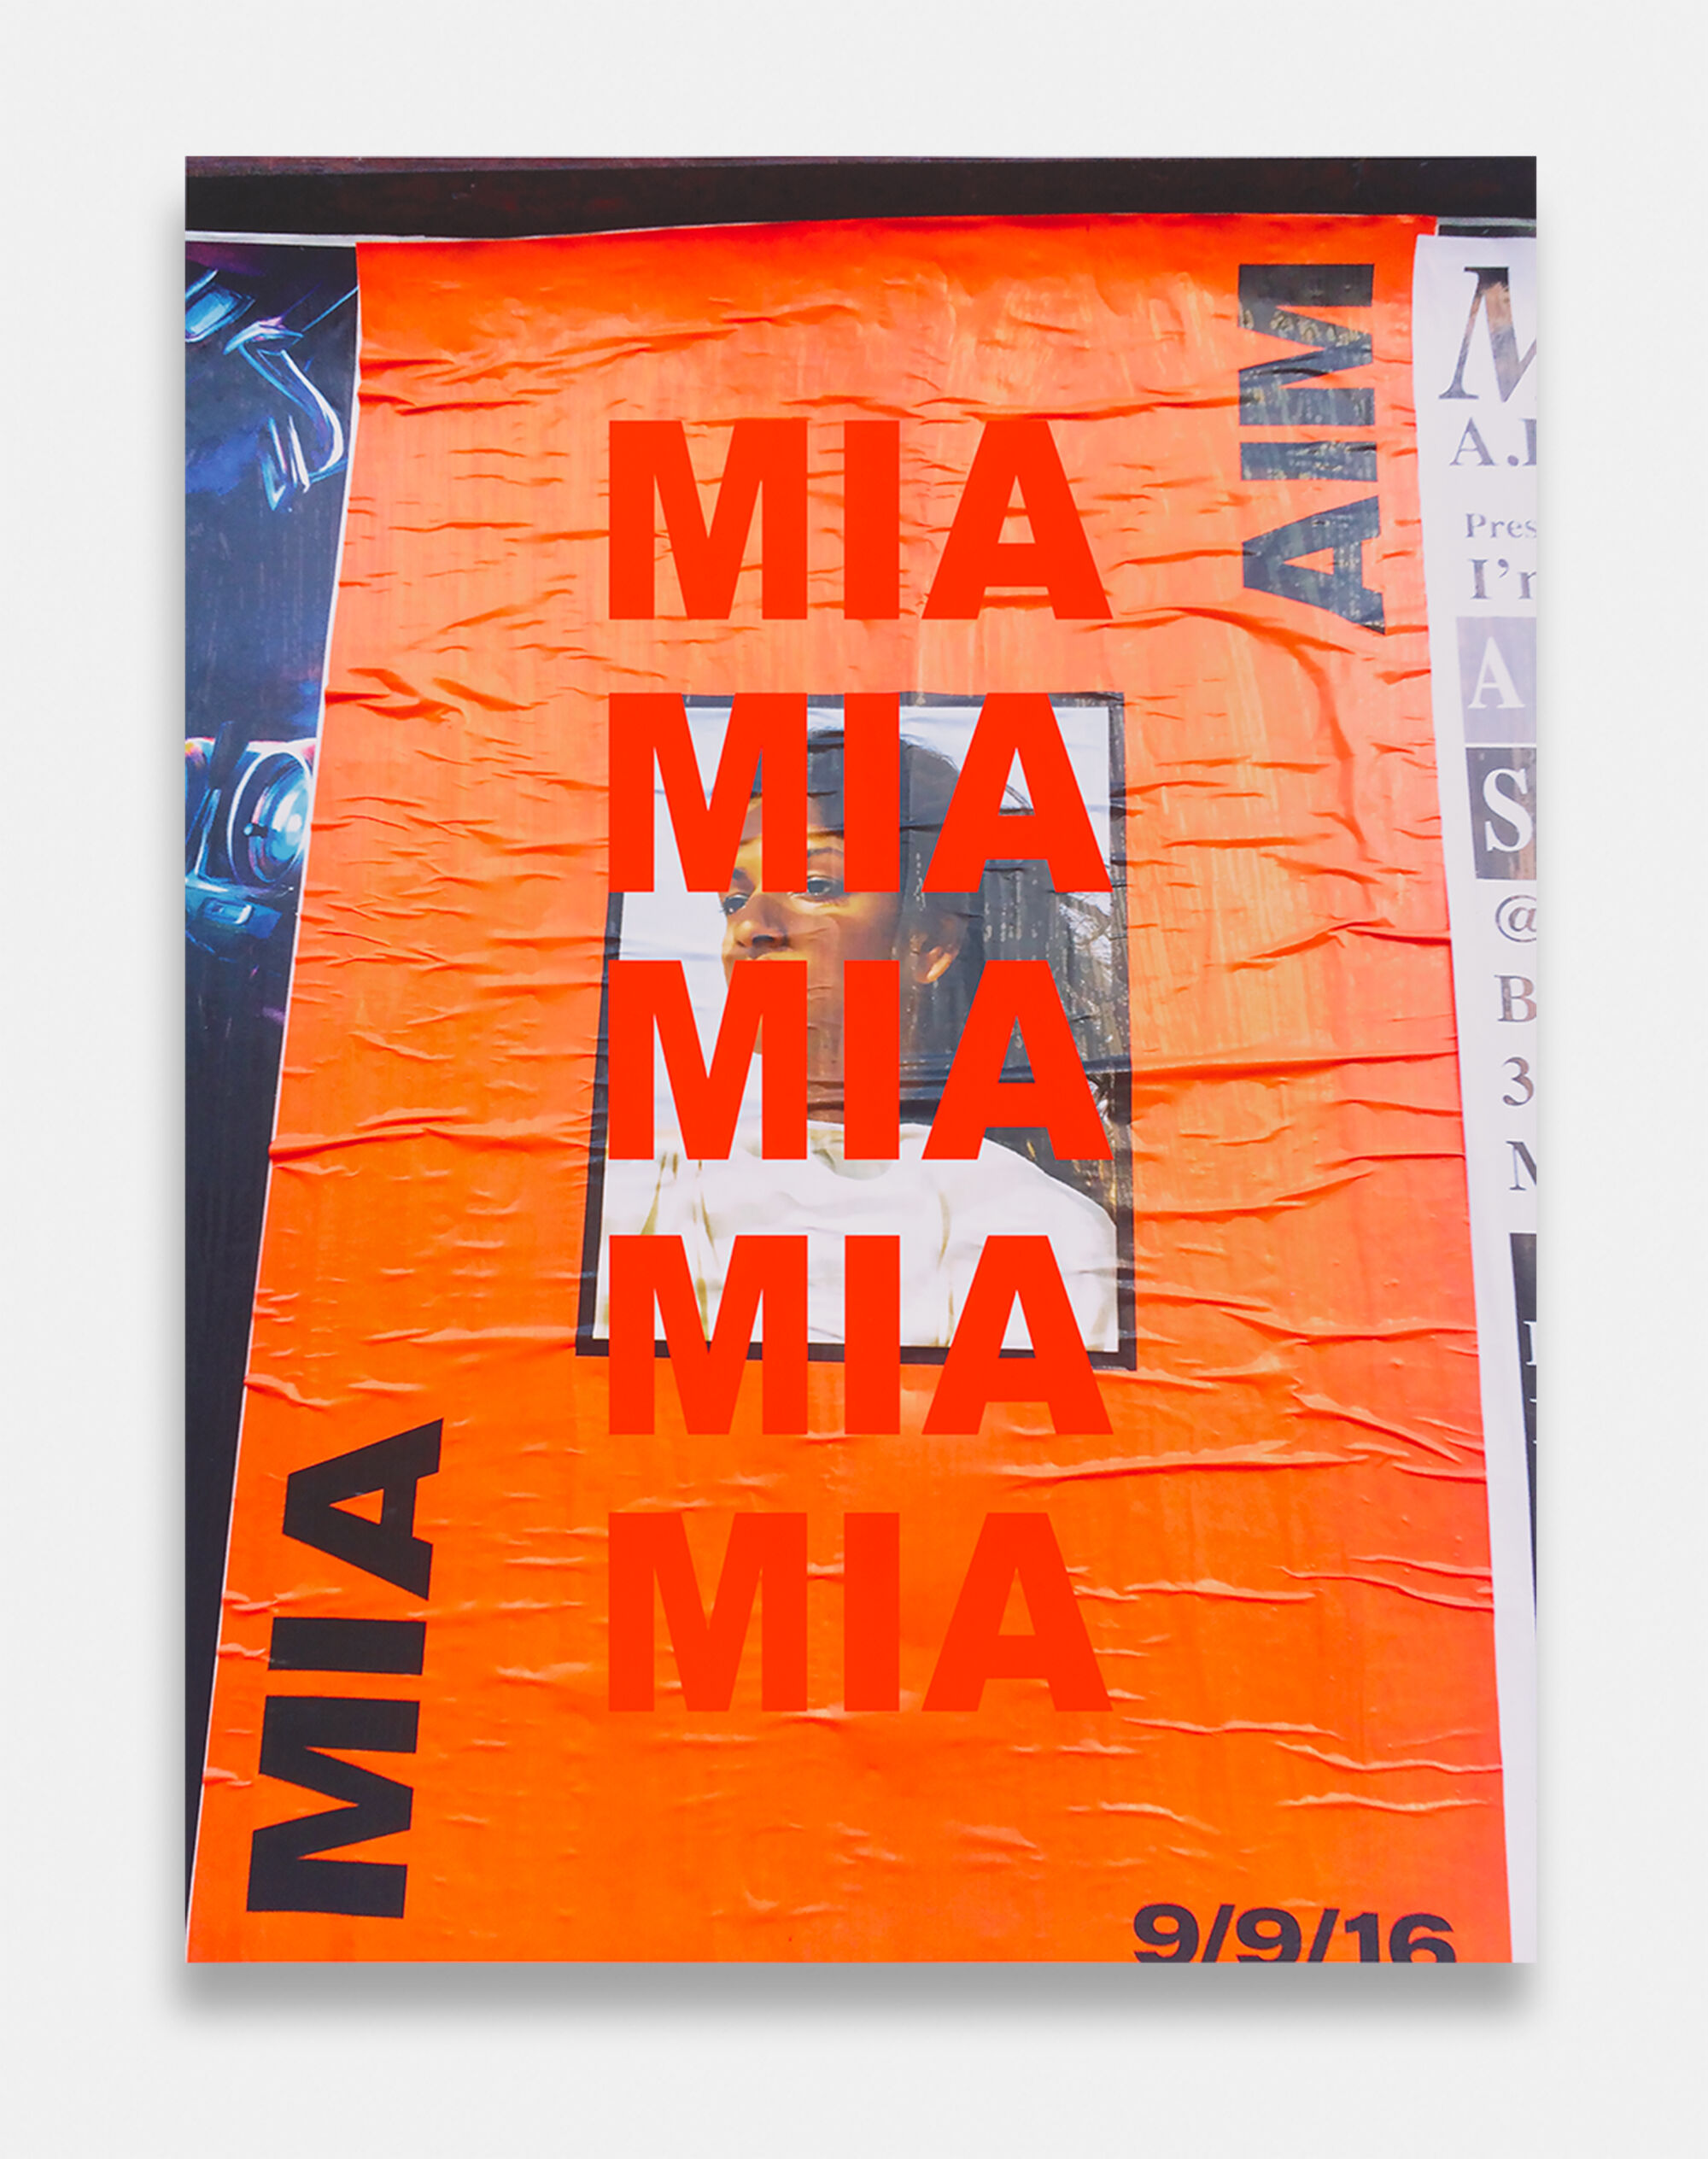 The Wick - Sonia Boyce On My Way: MIA MIA MIA, 2022 Digital print and fluorescent dust on somerset velvet 100 x 75 cm (39 3:8 x 29 1:2 in.) Courtesy of the artist and Simon Lee Gallery.